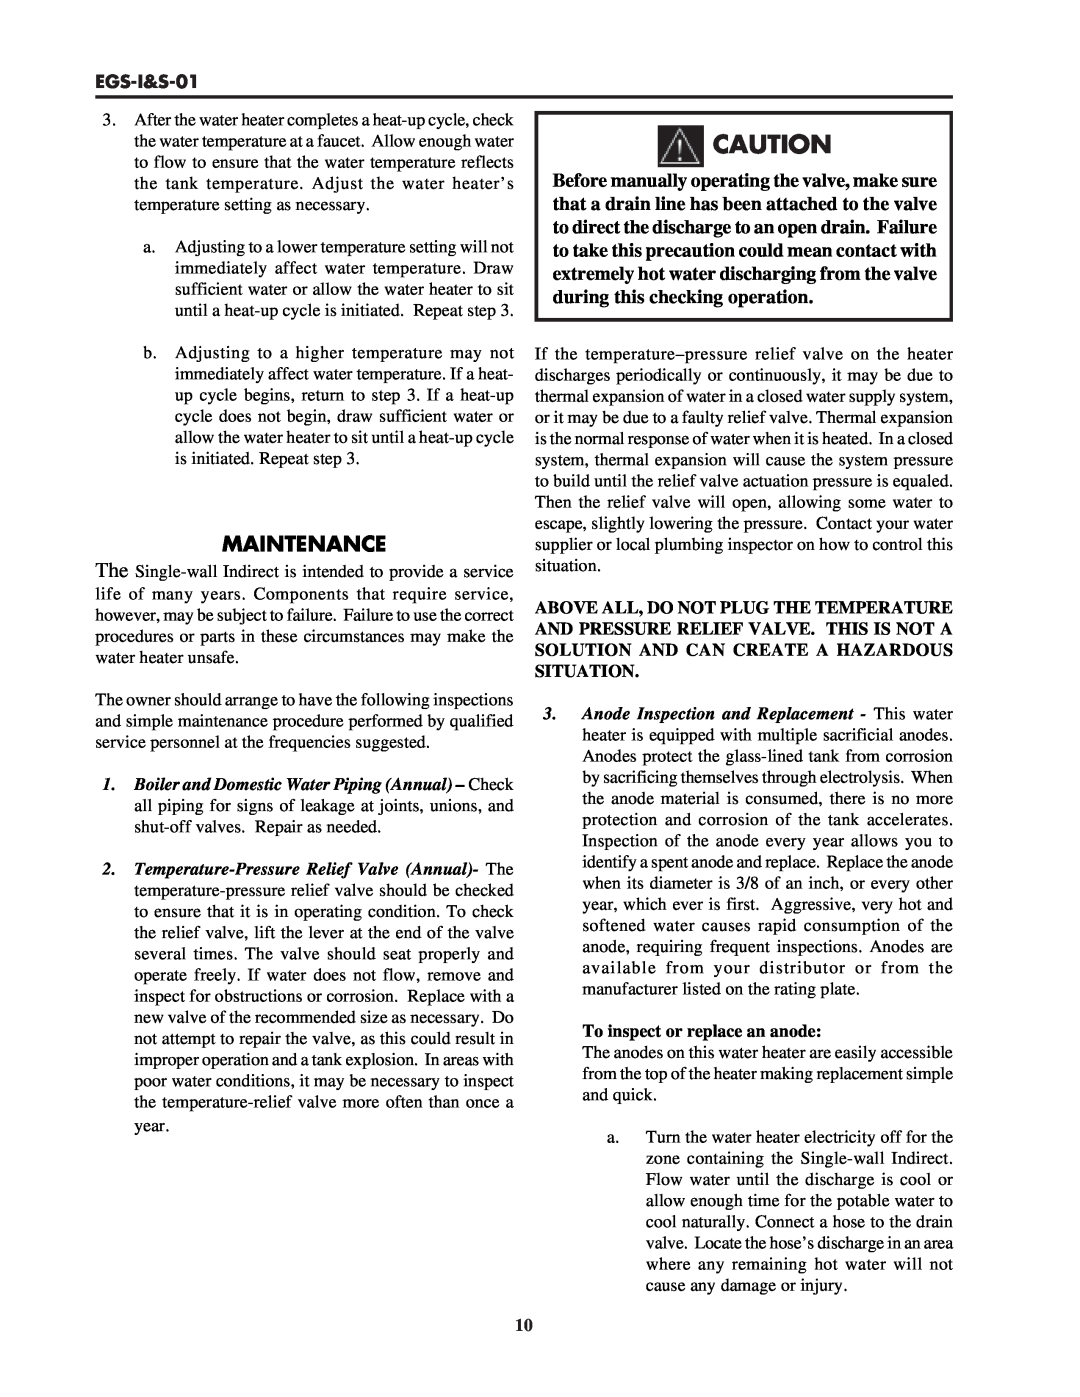 Lochinvar EGS-I&S-01 service manual Maintenance, To inspect or replace an anode 